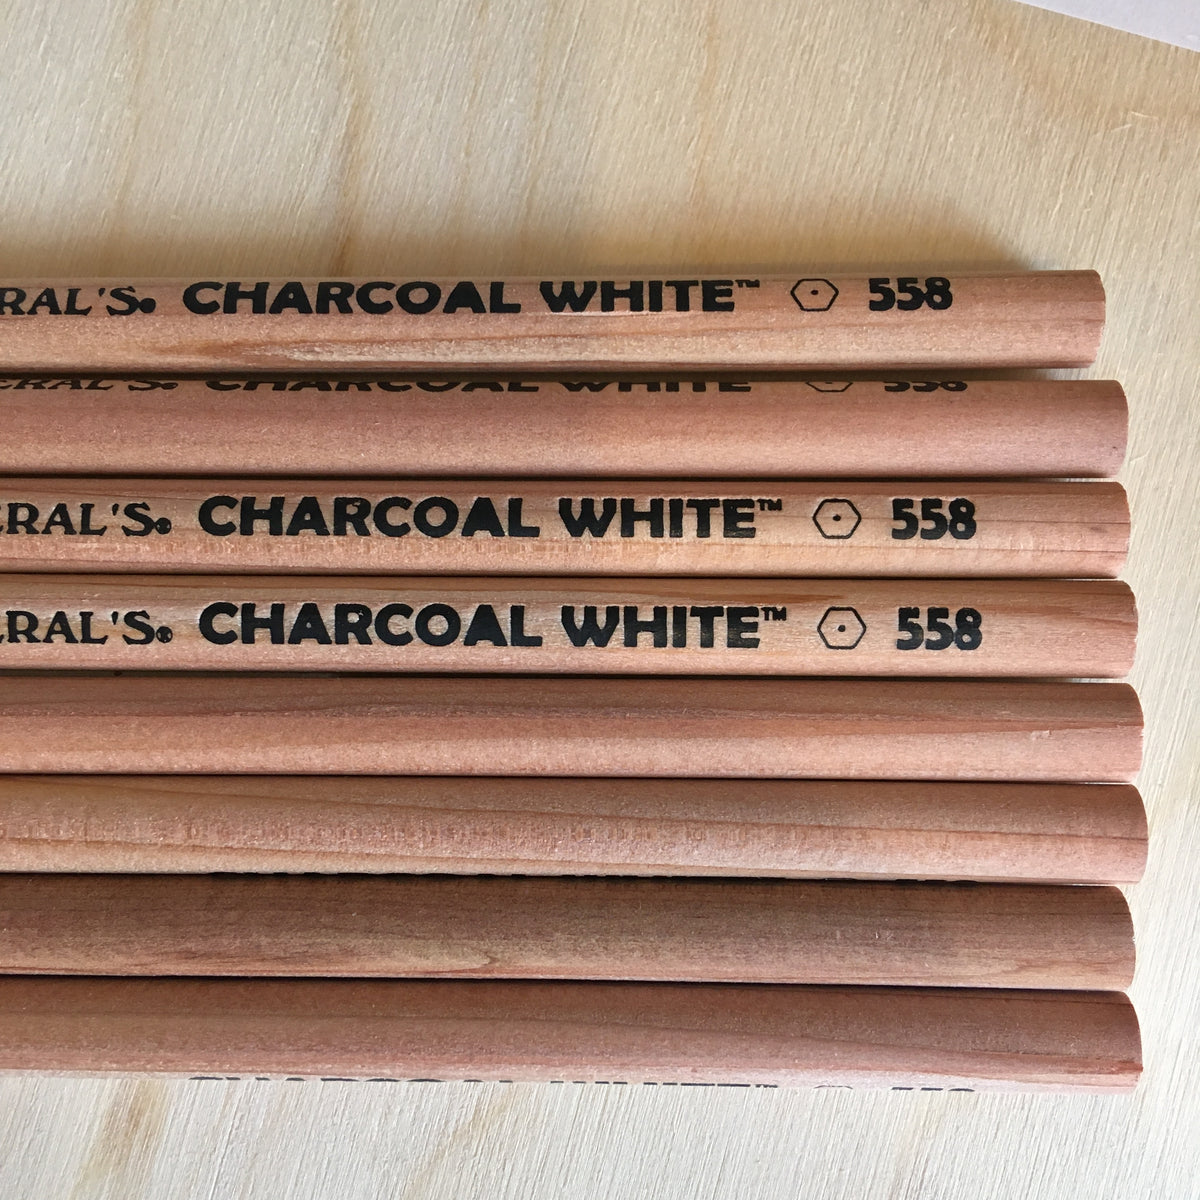 Charcoal White Pencil #558 by General Pencil